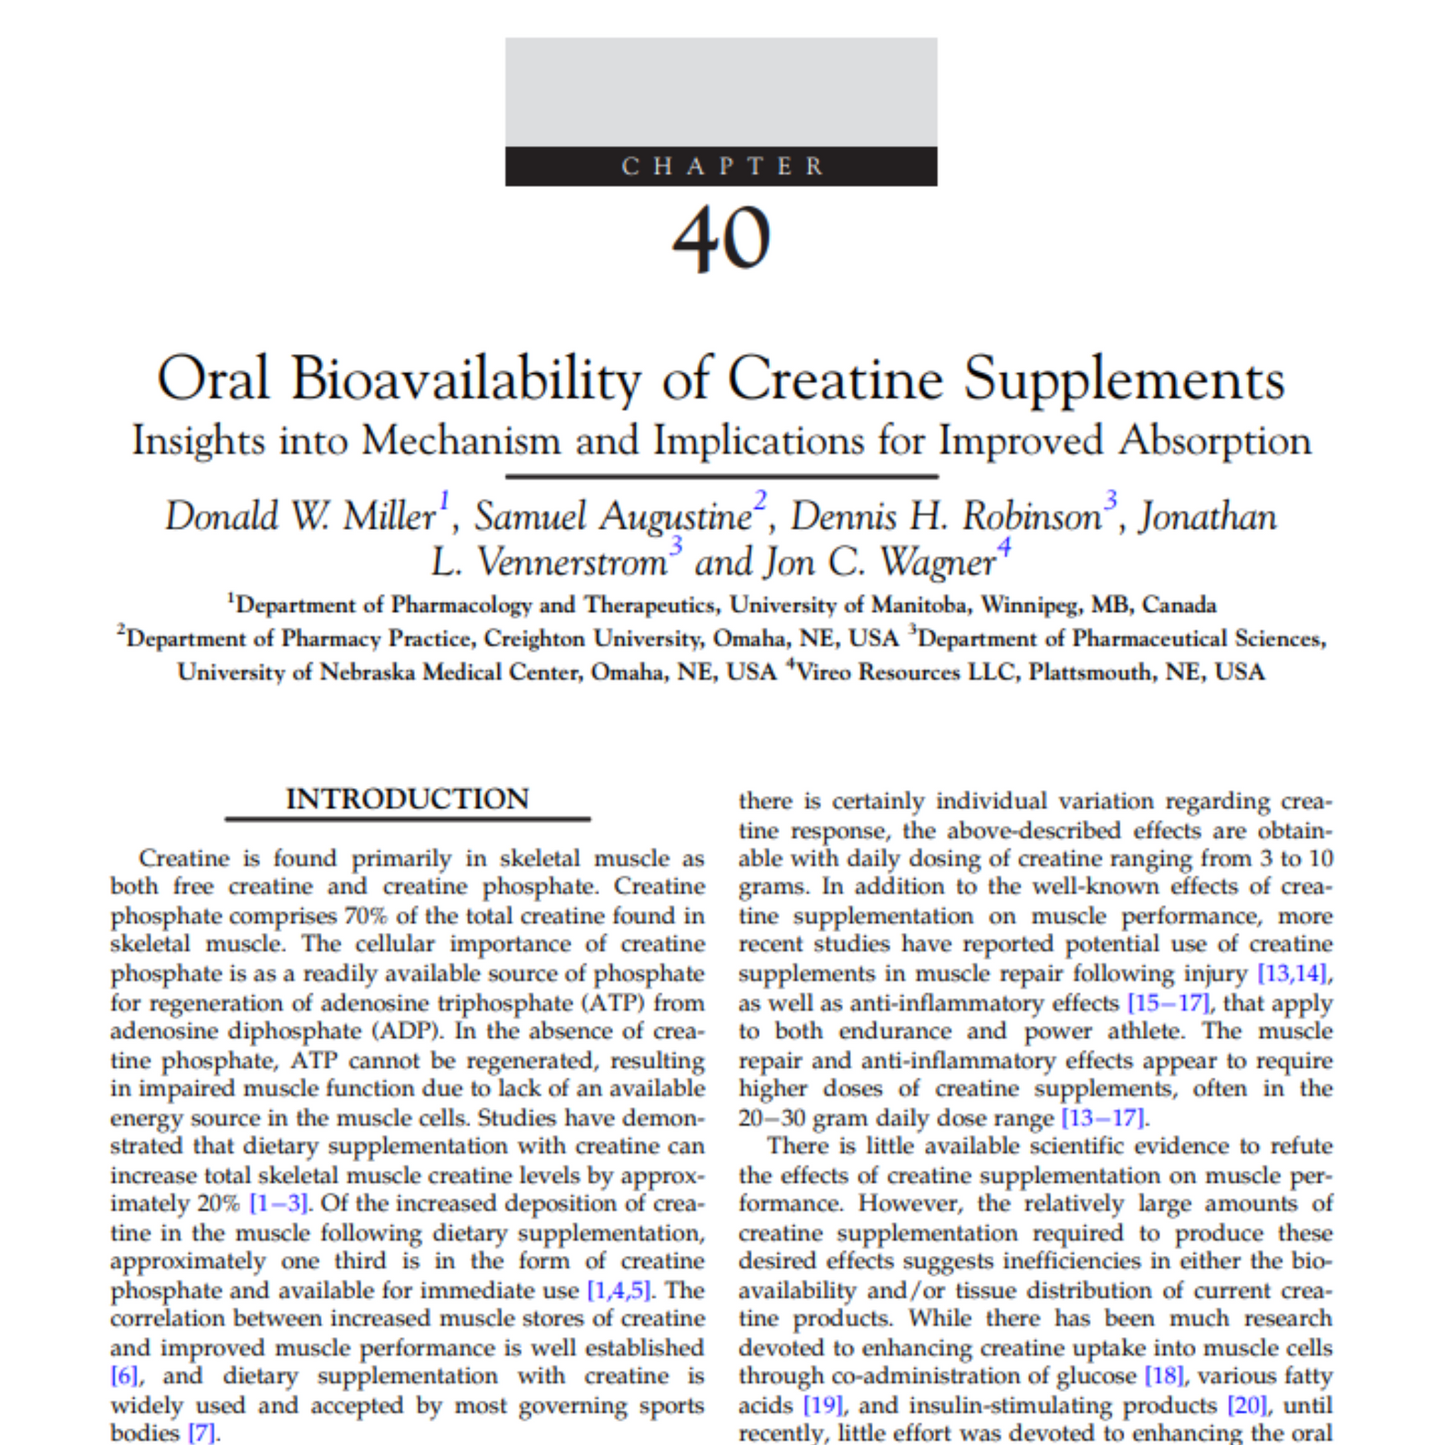 ORAL BIOAVAILABILITY OF CREATINE SUPPLEMENTS: INSIGHTS INTO MECHANISM AND IMPLICATIONS FOR IMPROVED ABSORPTION